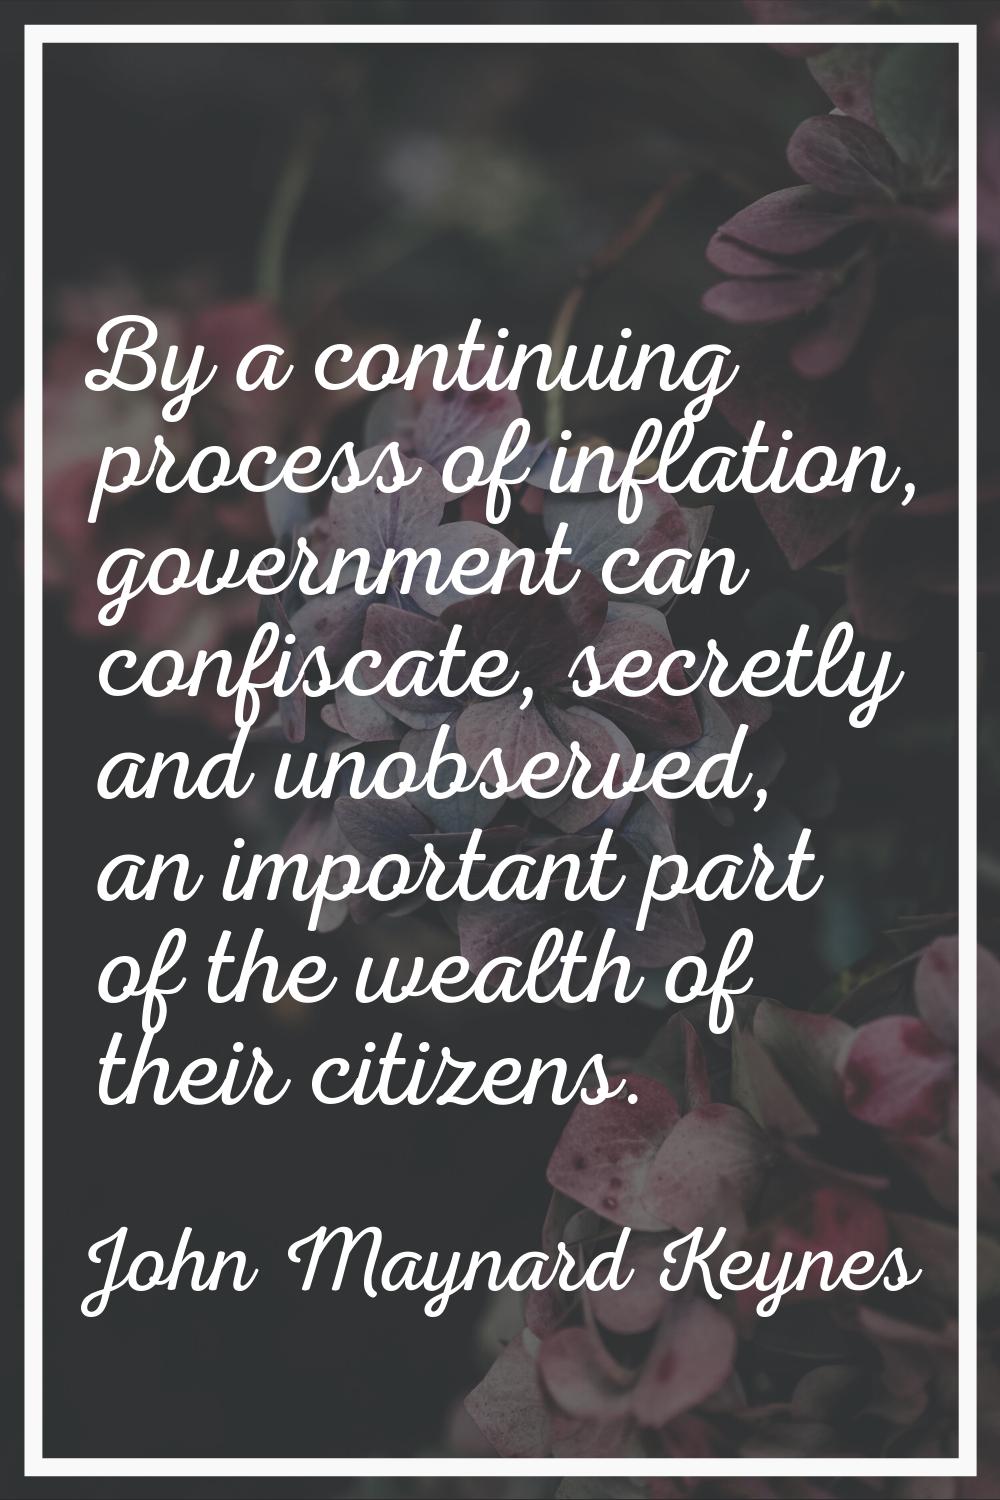 By a continuing process of inflation, government can confiscate, secretly and unobserved, an import